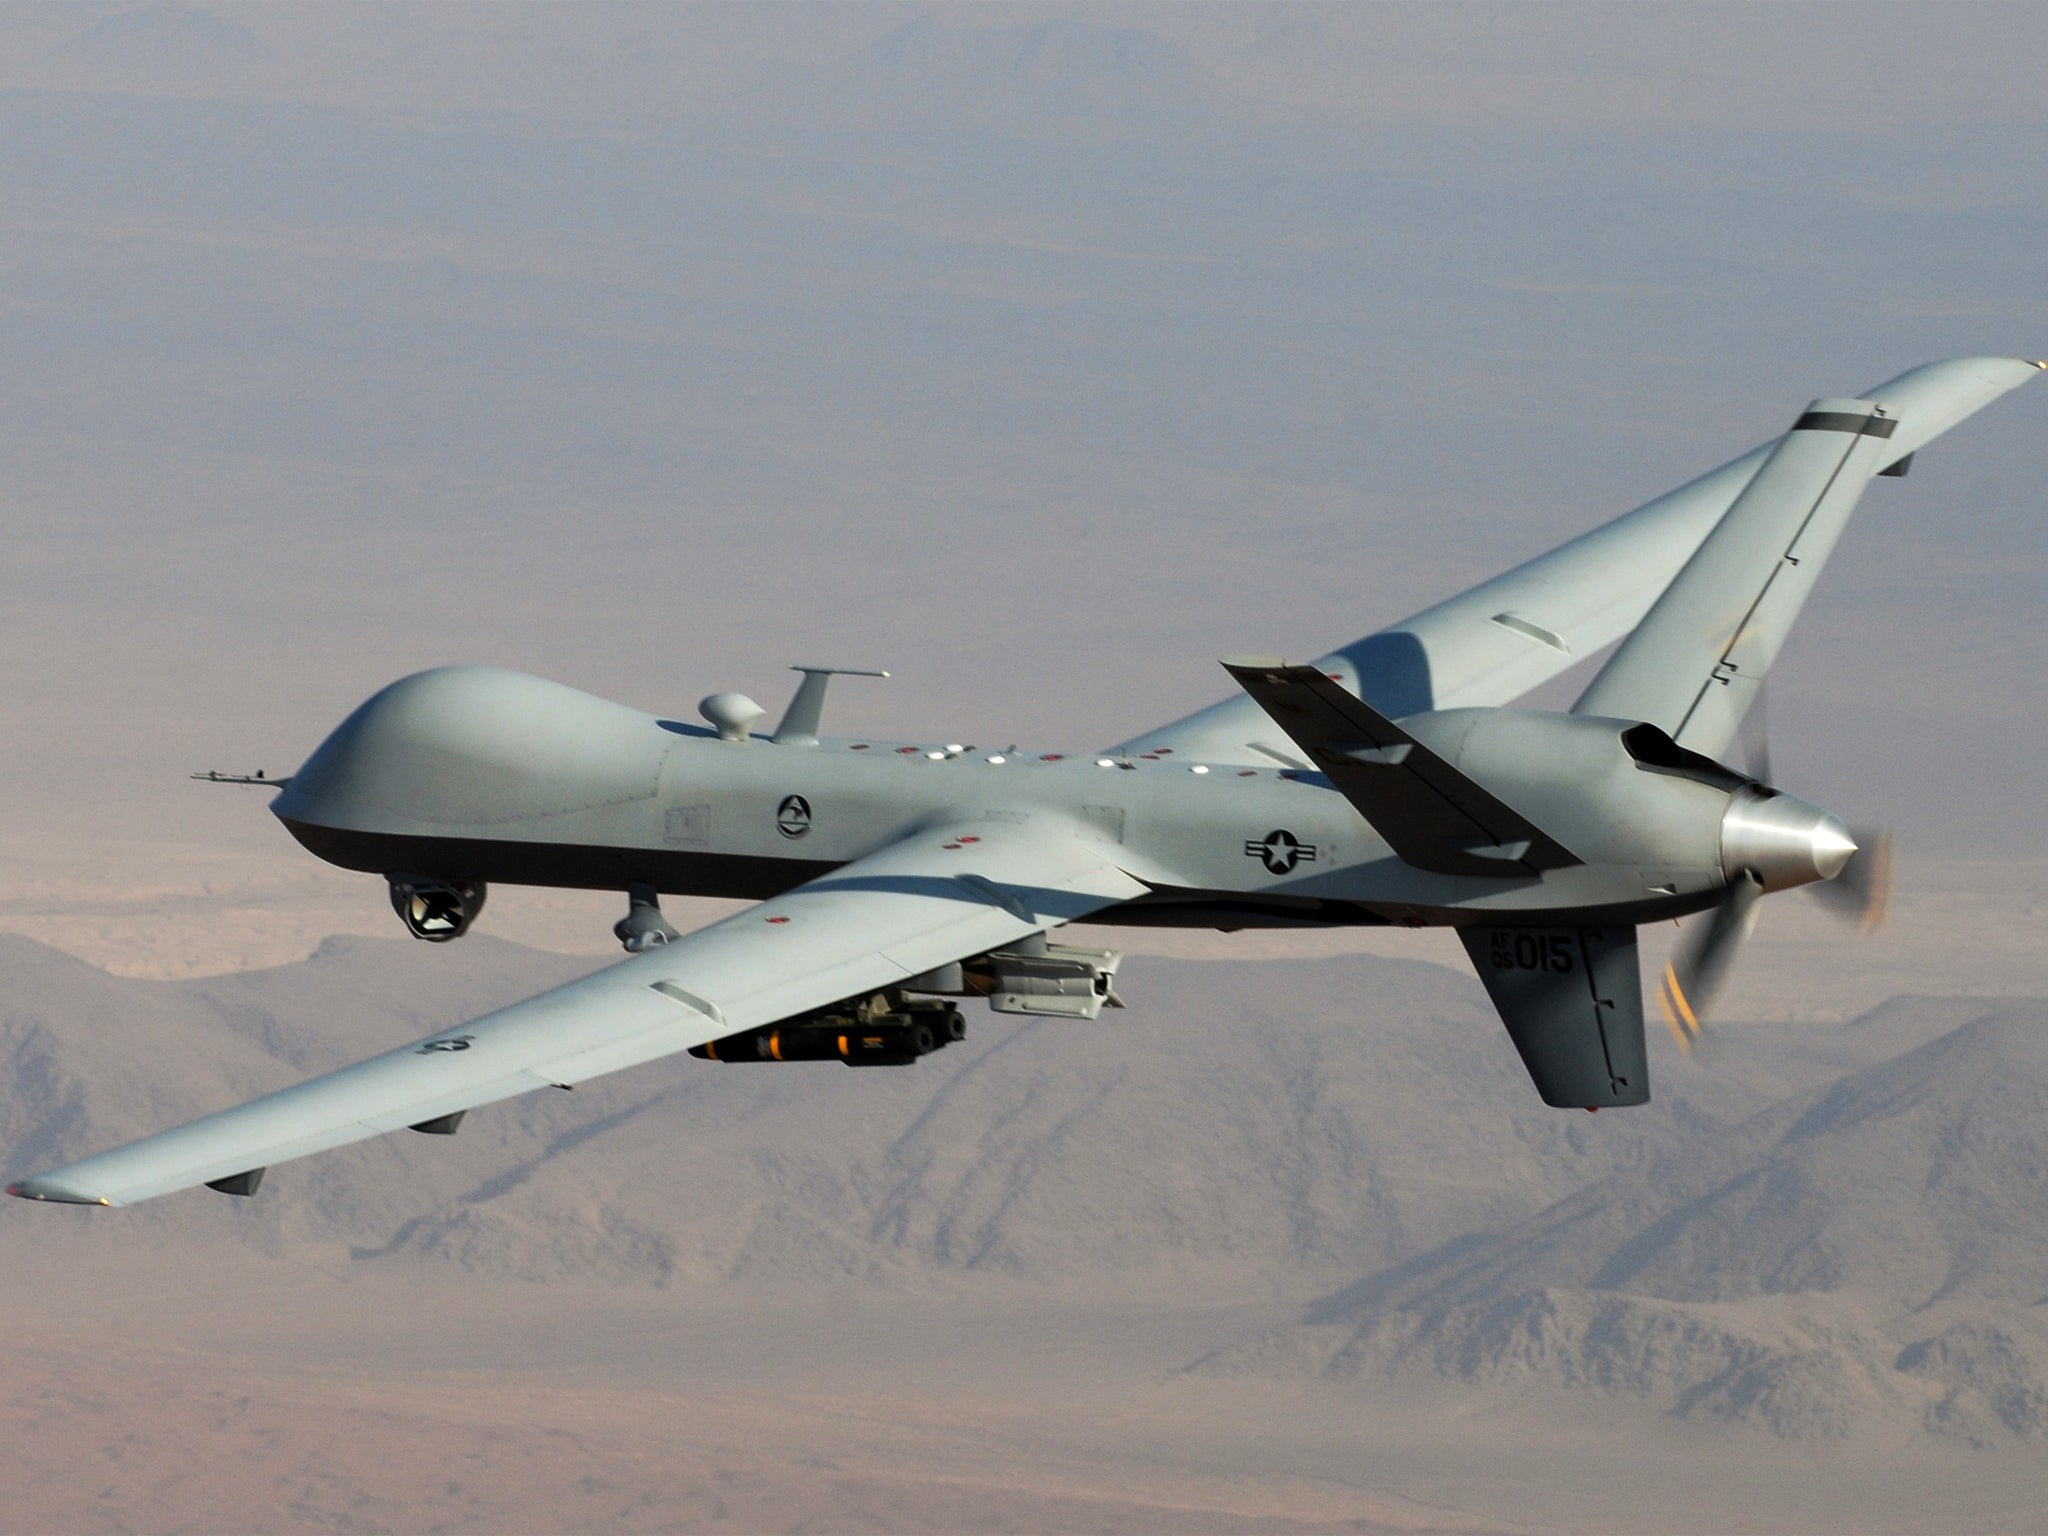 There have been 255 drone strikes on Pakistan since 2004